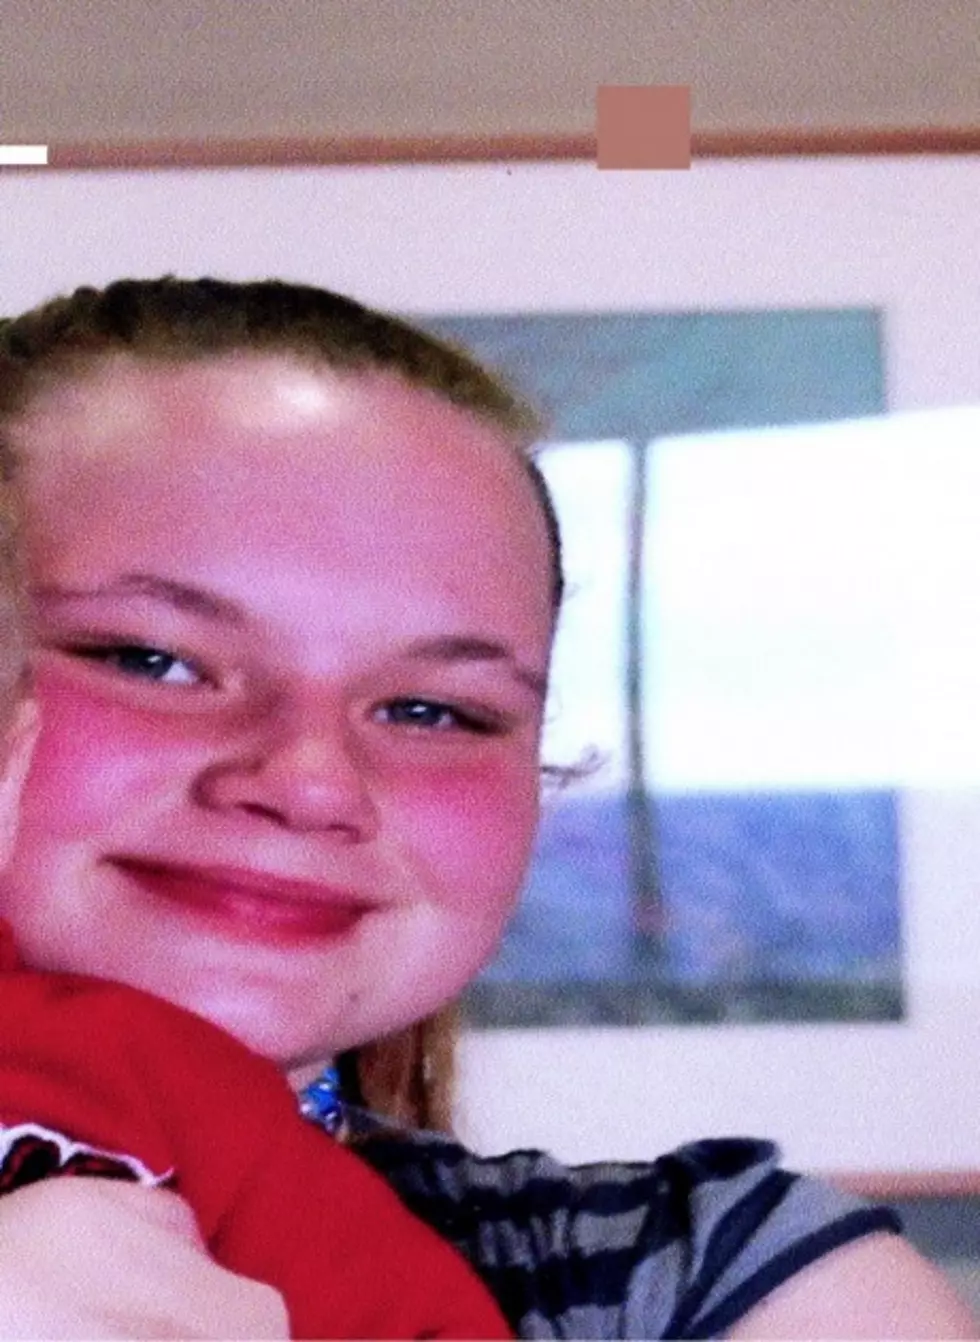 Police Searching for Missing 14-Year-Old Girl Rebecca Girard